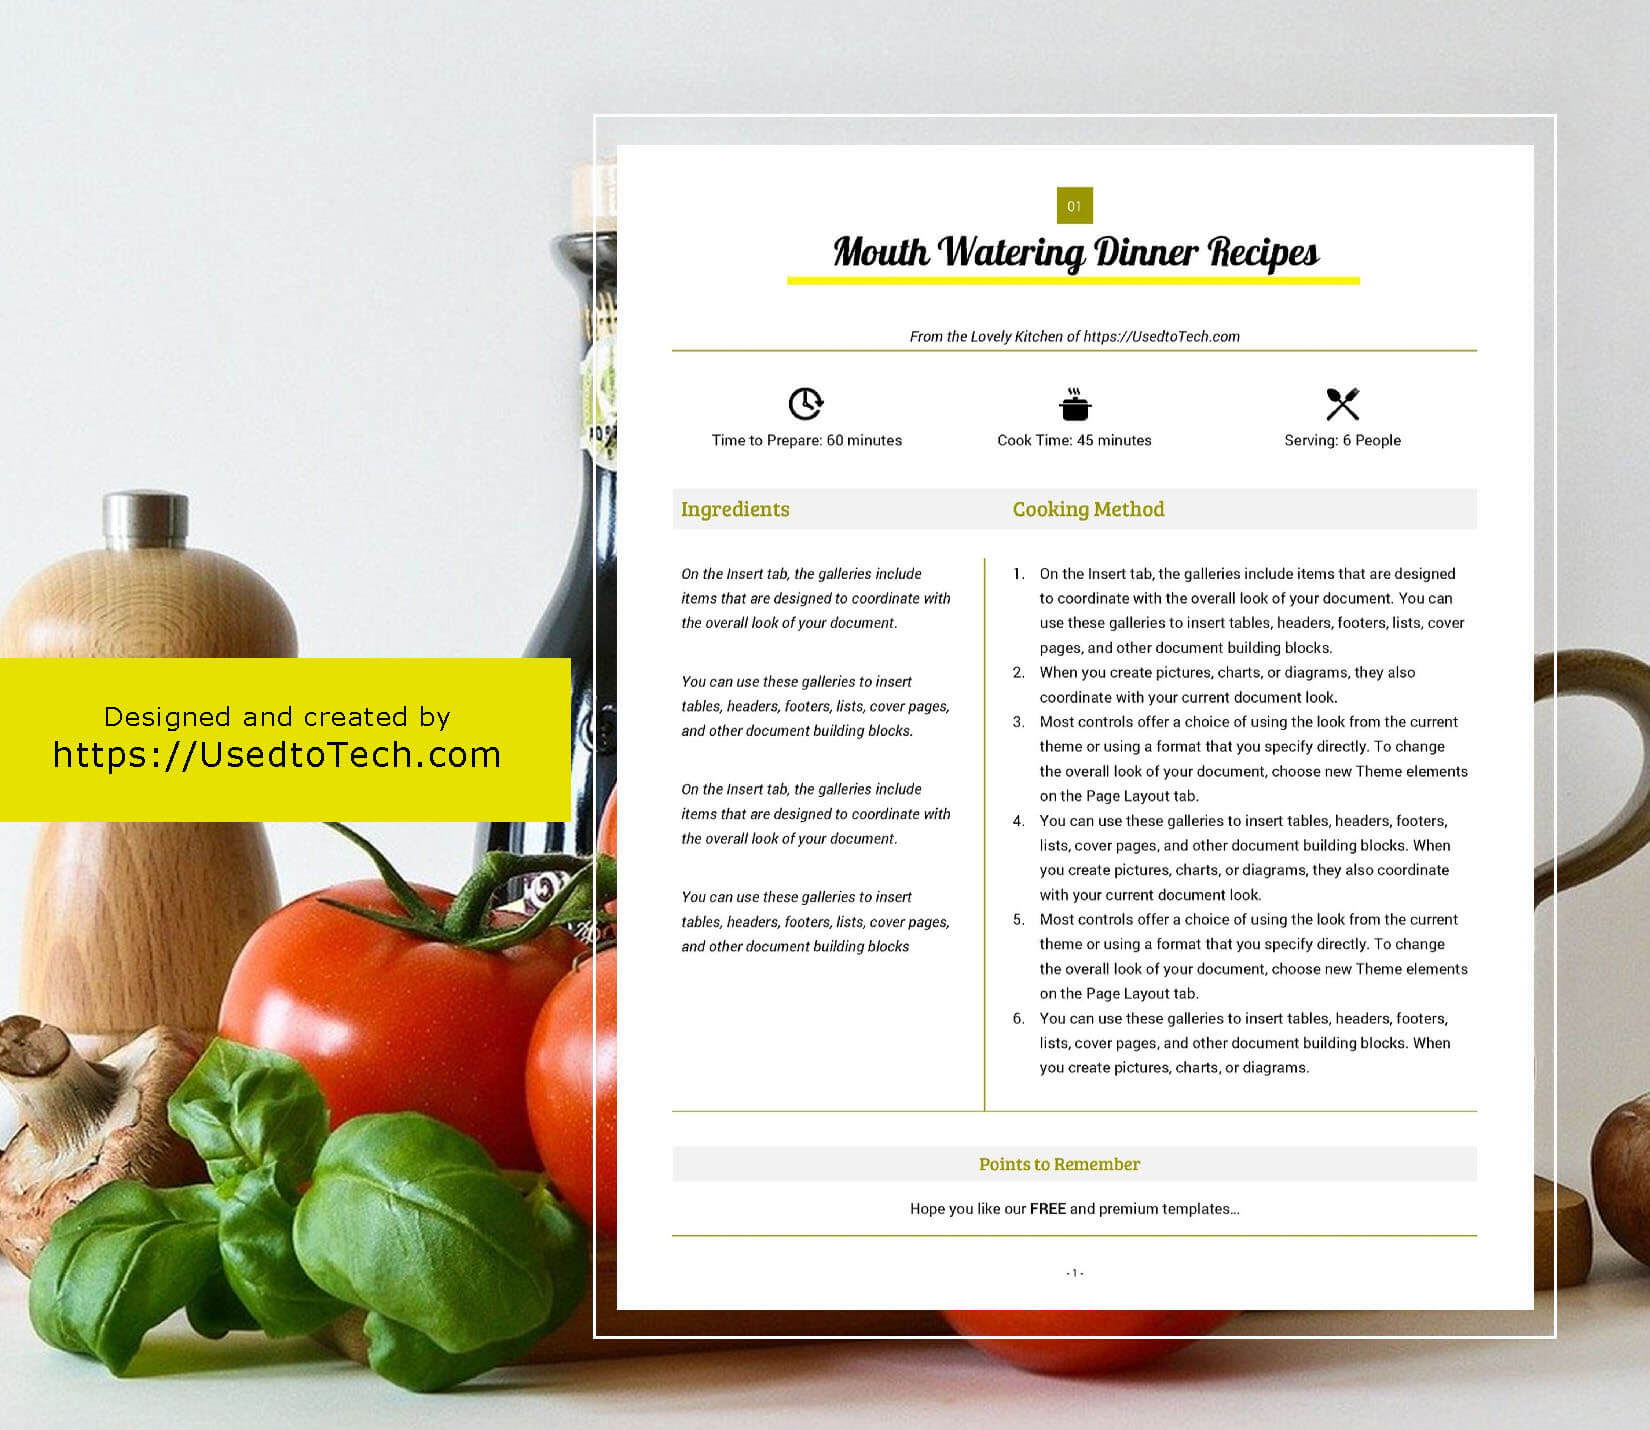 Best Looking Full Page Recipe Card In Microsoft Word – Used With Microsoft Word Recipe Card Template